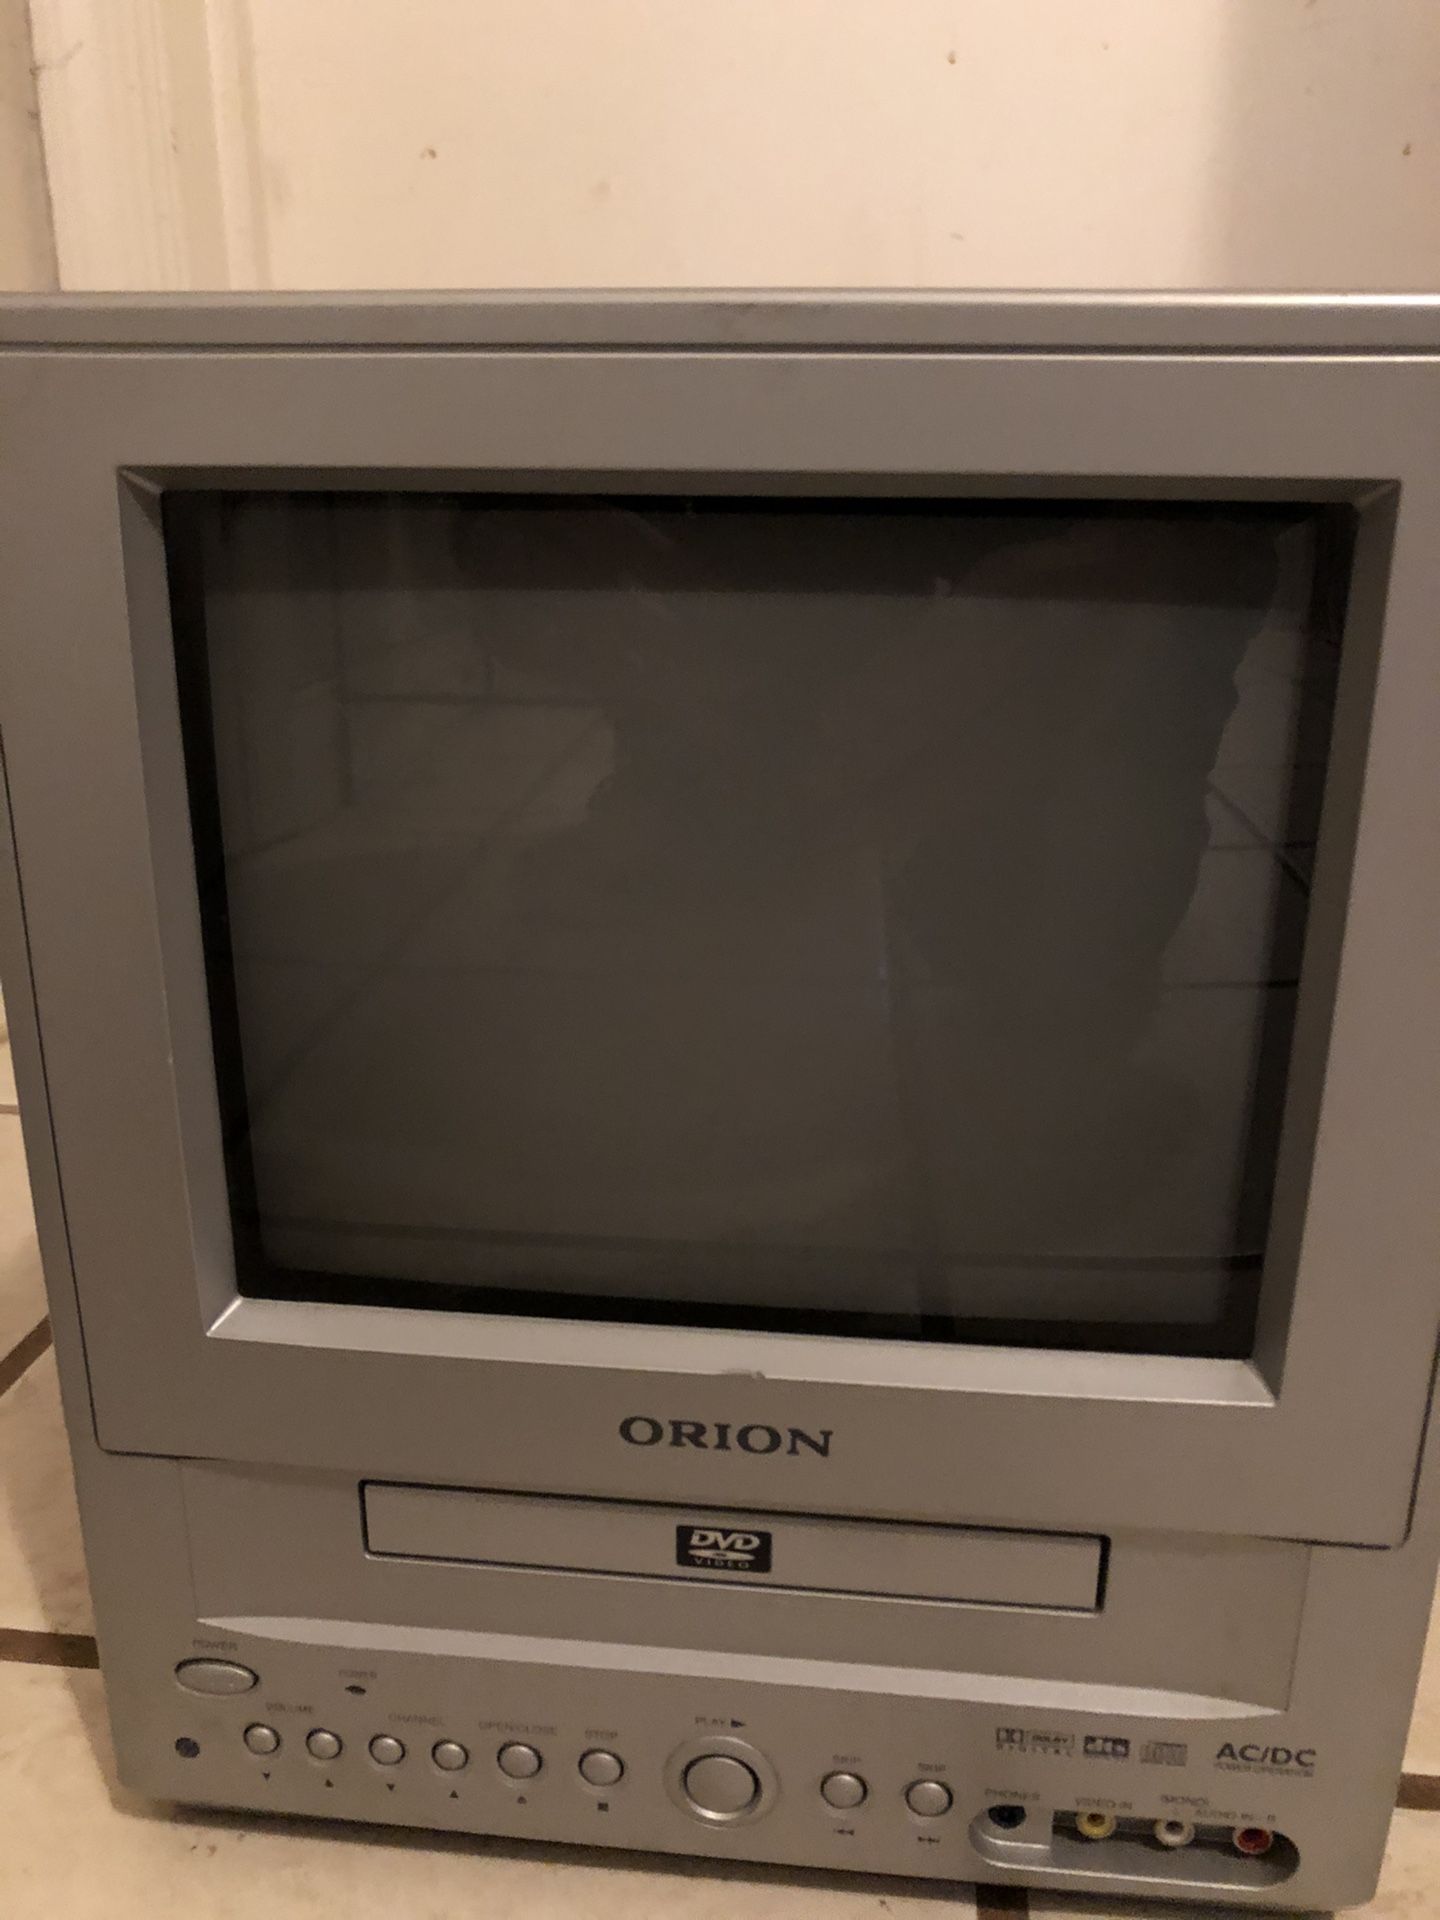 COMBO ORION 9" TV DVD CRT PORTABLE TELEVISION TVDVD092 GAMING CAMPING